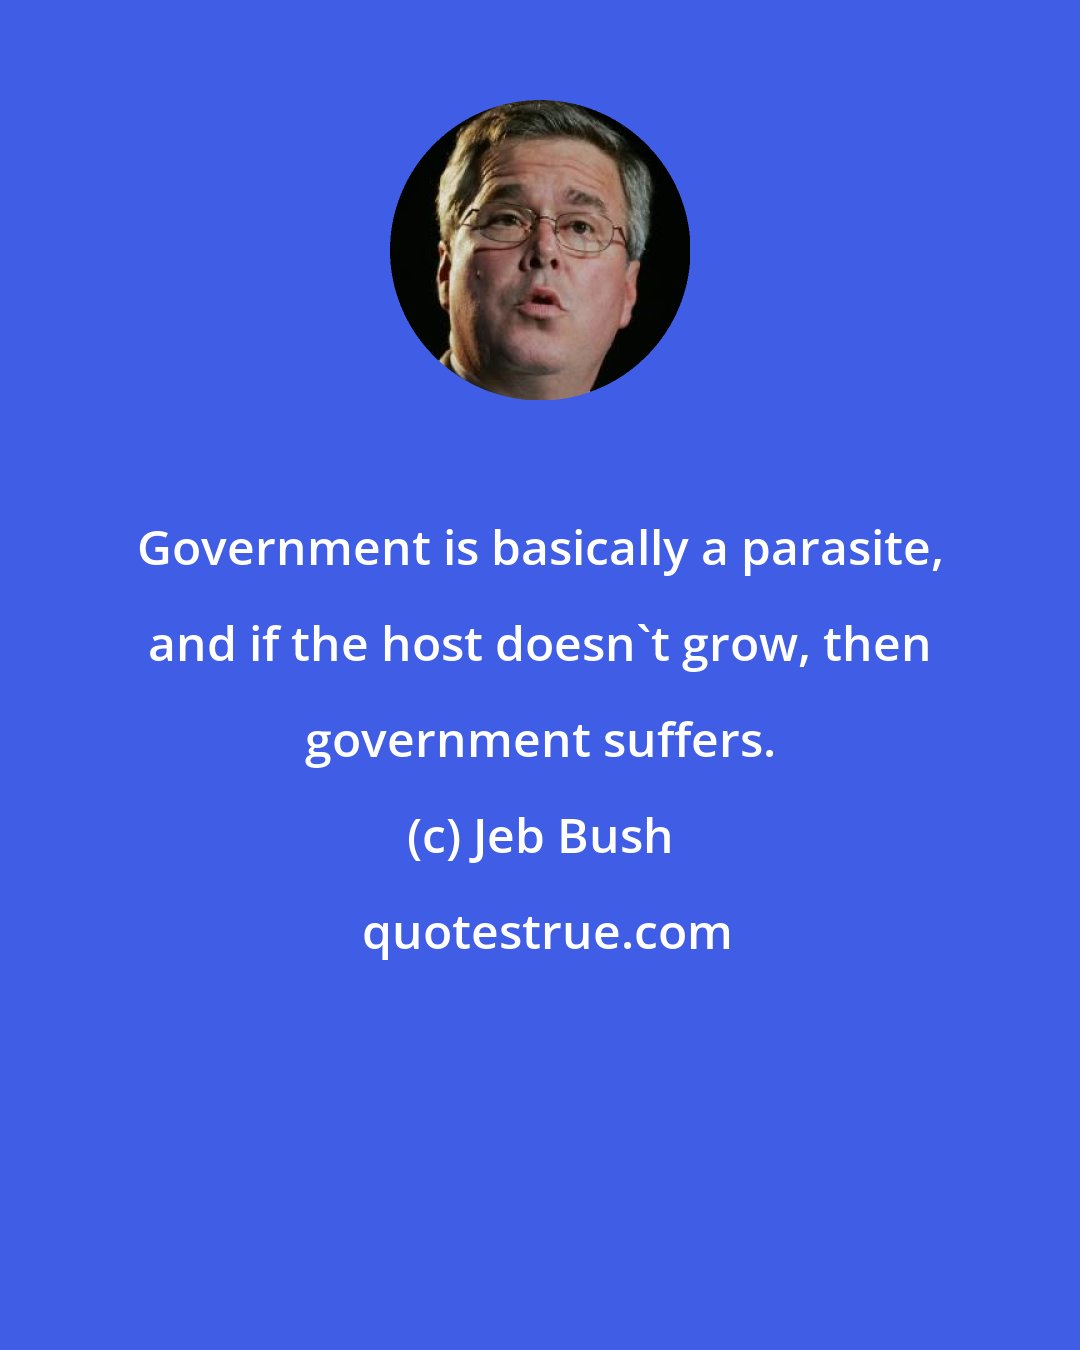 Jeb Bush: Government is basically a parasite, and if the host doesn't grow, then government suffers.